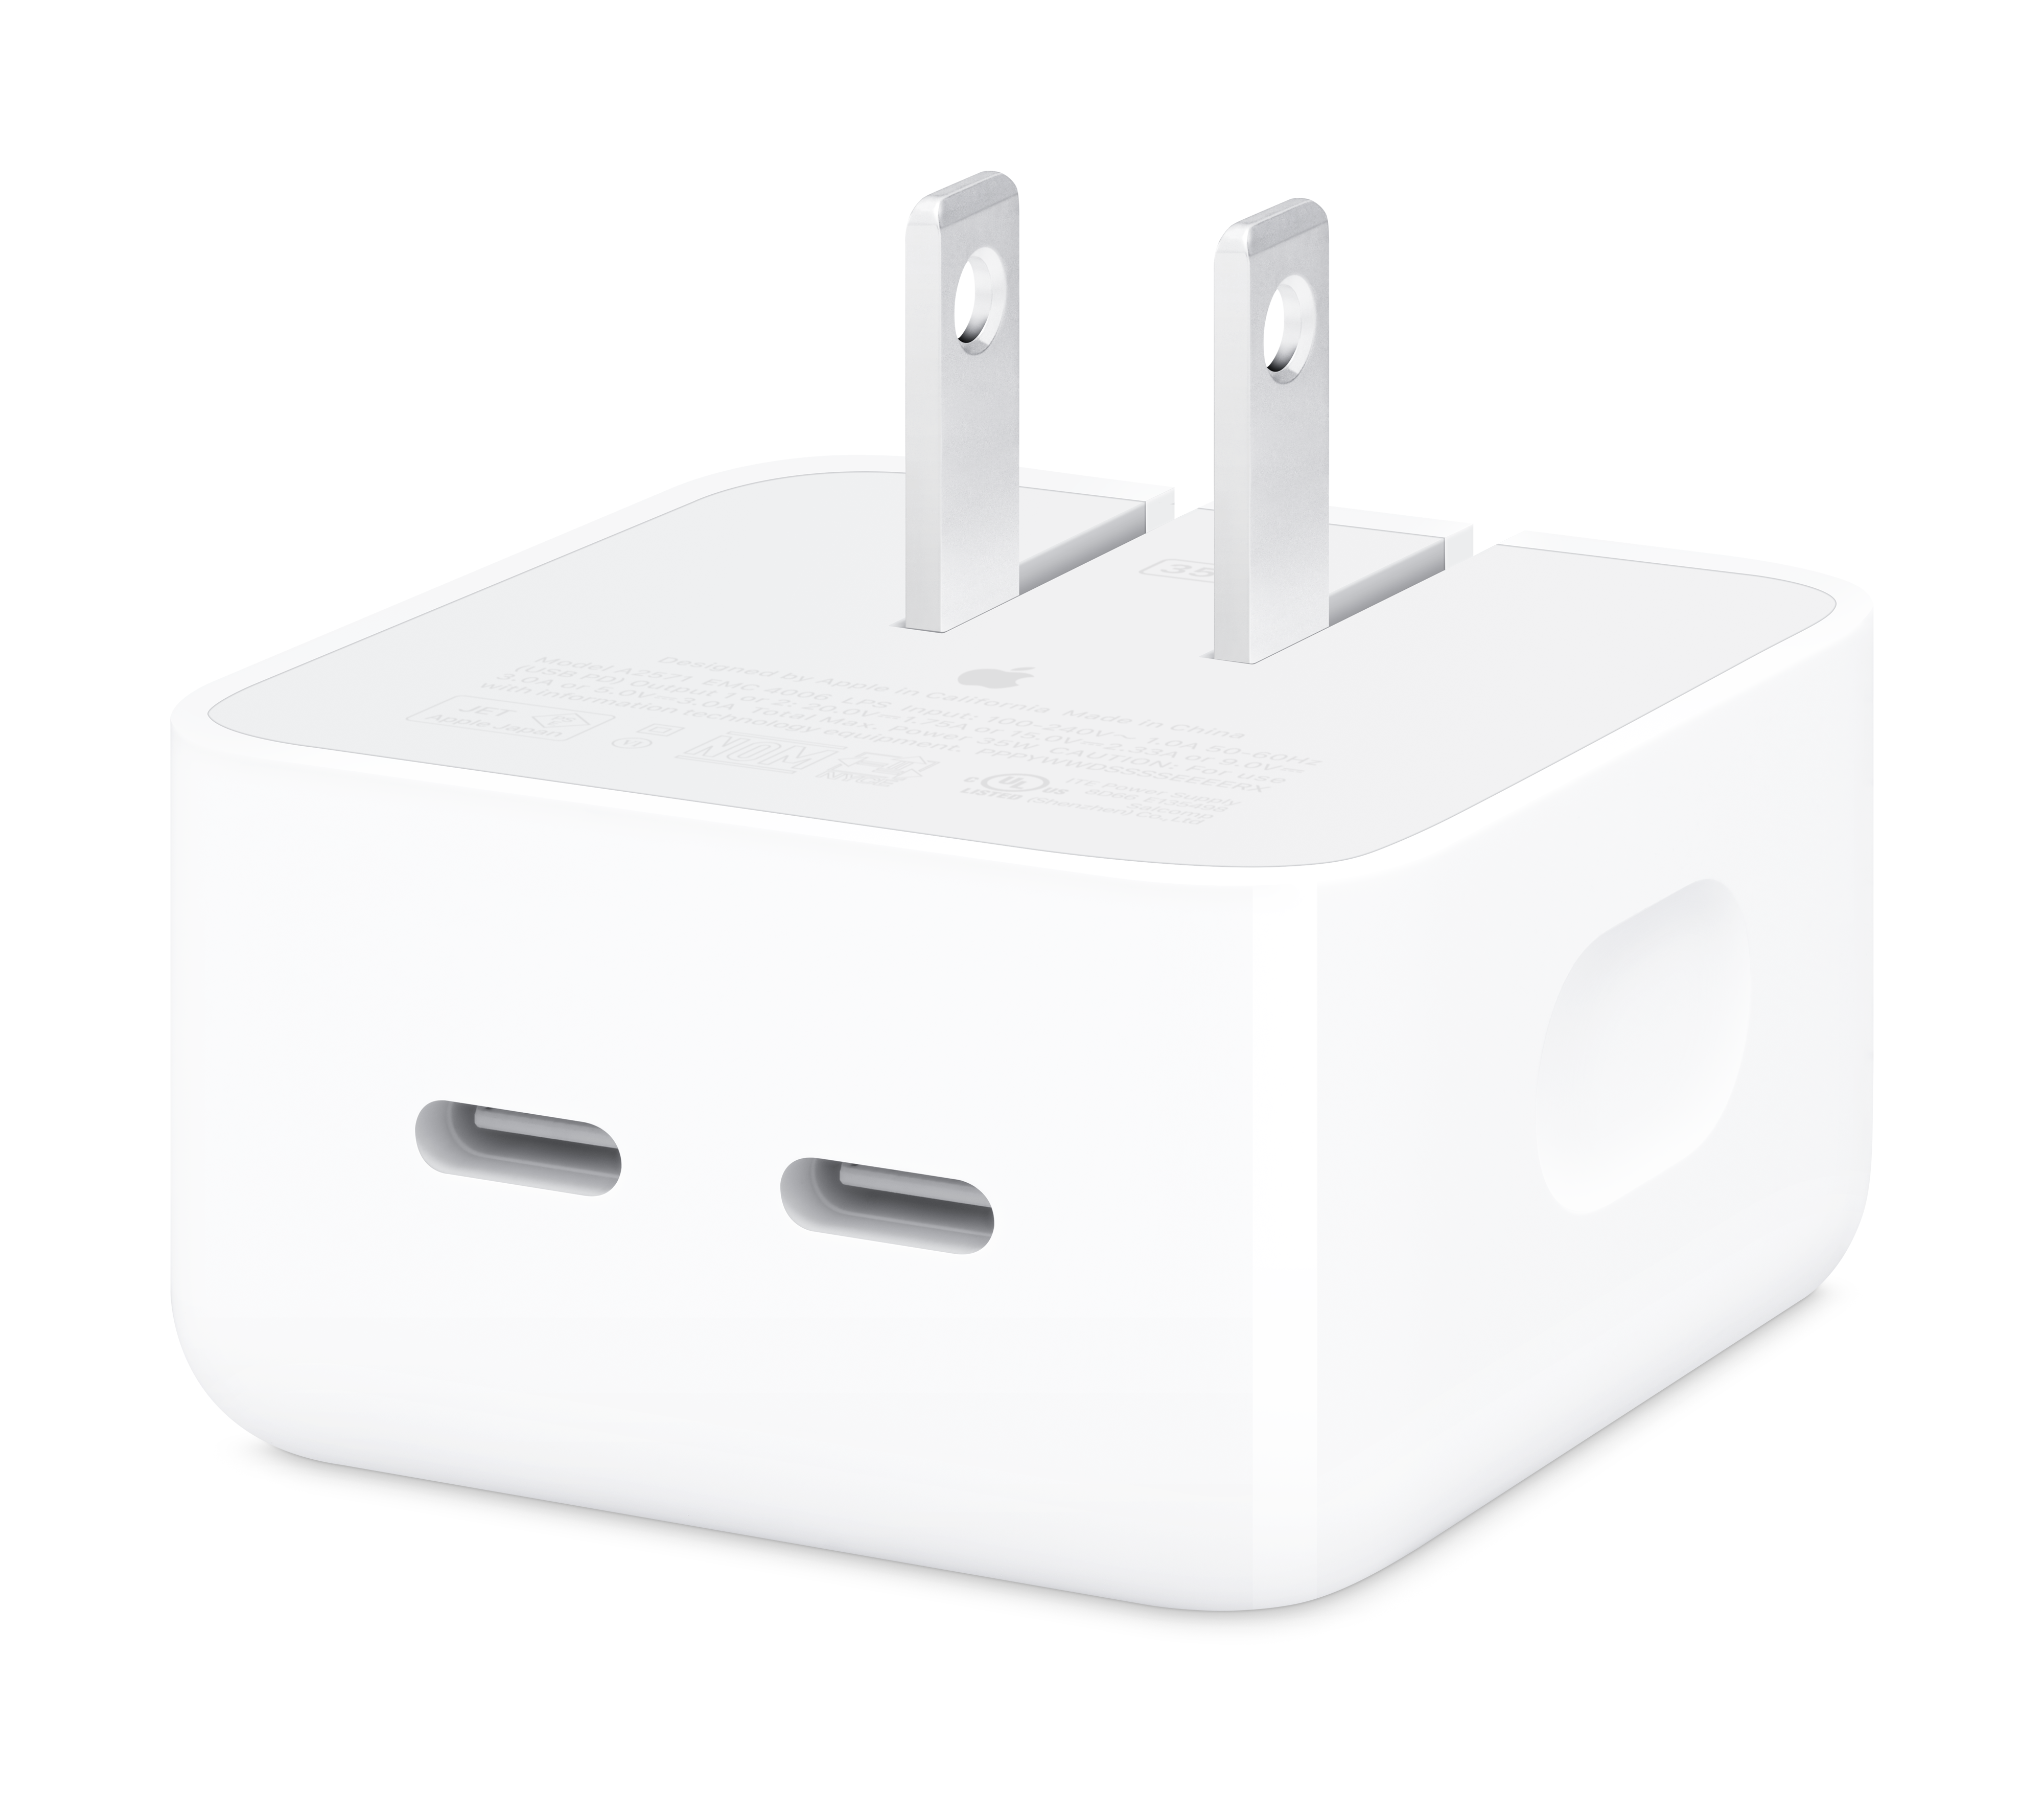 Image of Apple 35W Dual USB-C Port Compact Power Adapter